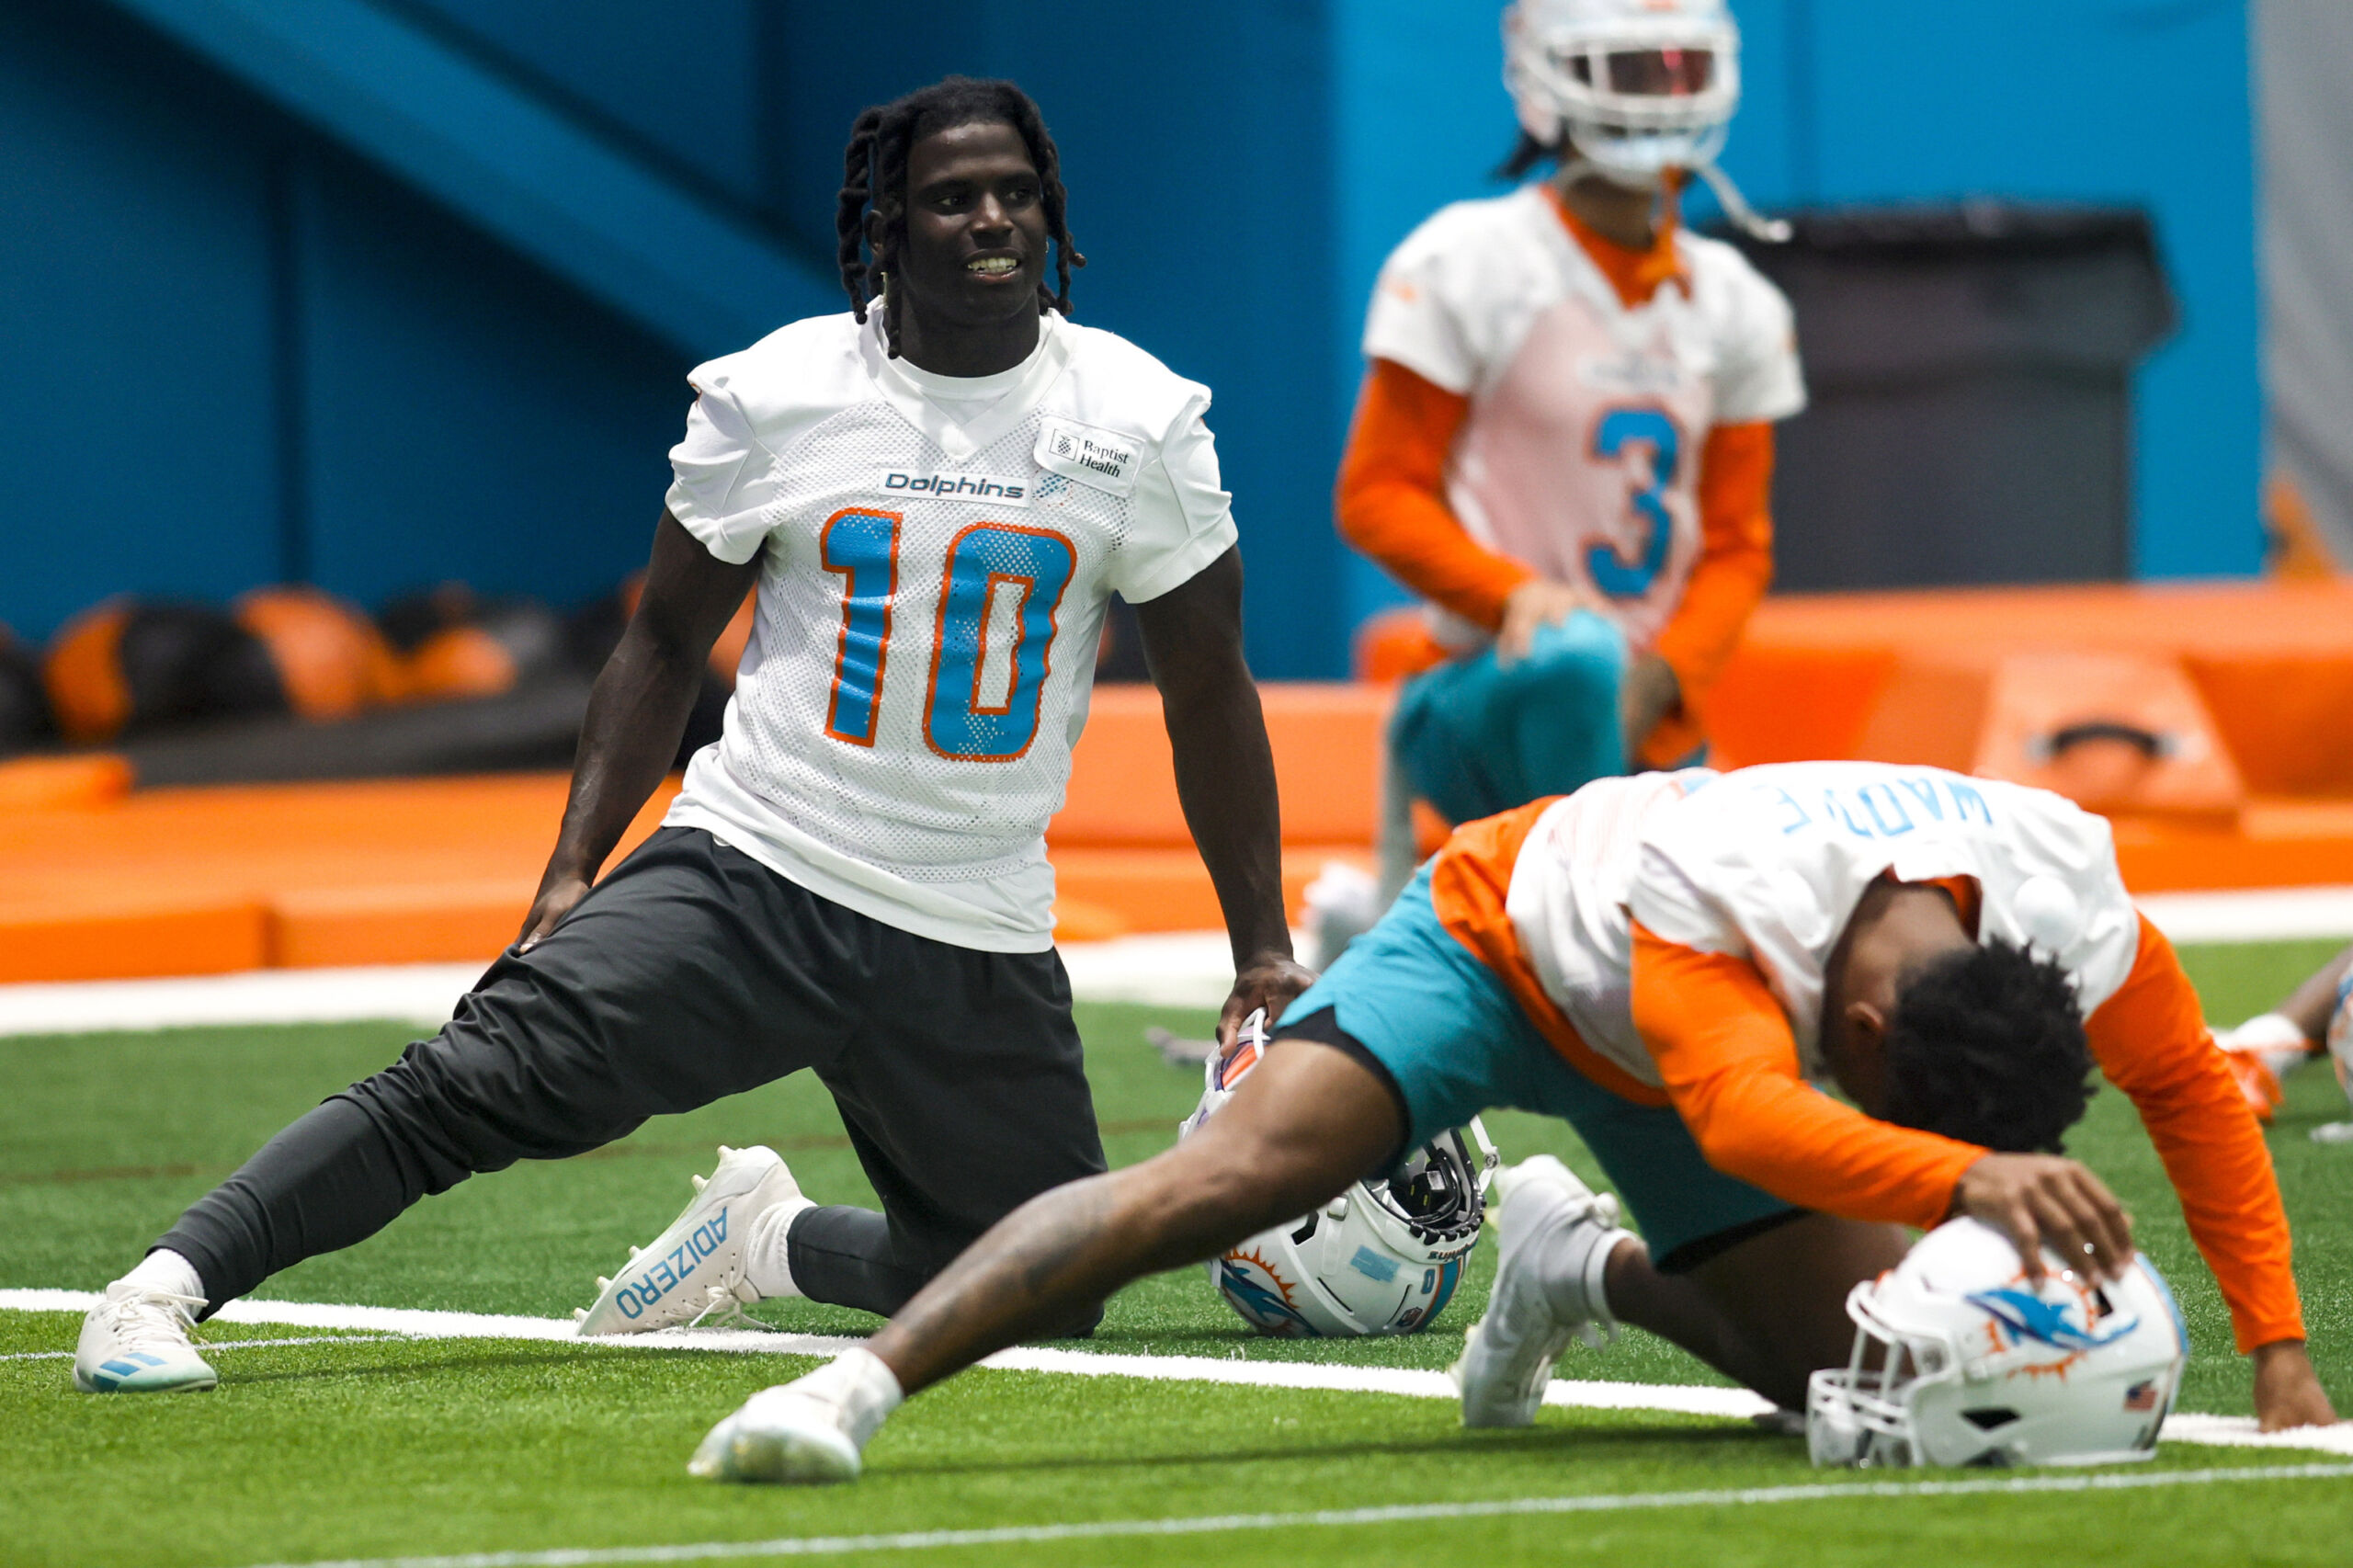 Tyreek Hill injury update: Dolphins WR will play in Week 6